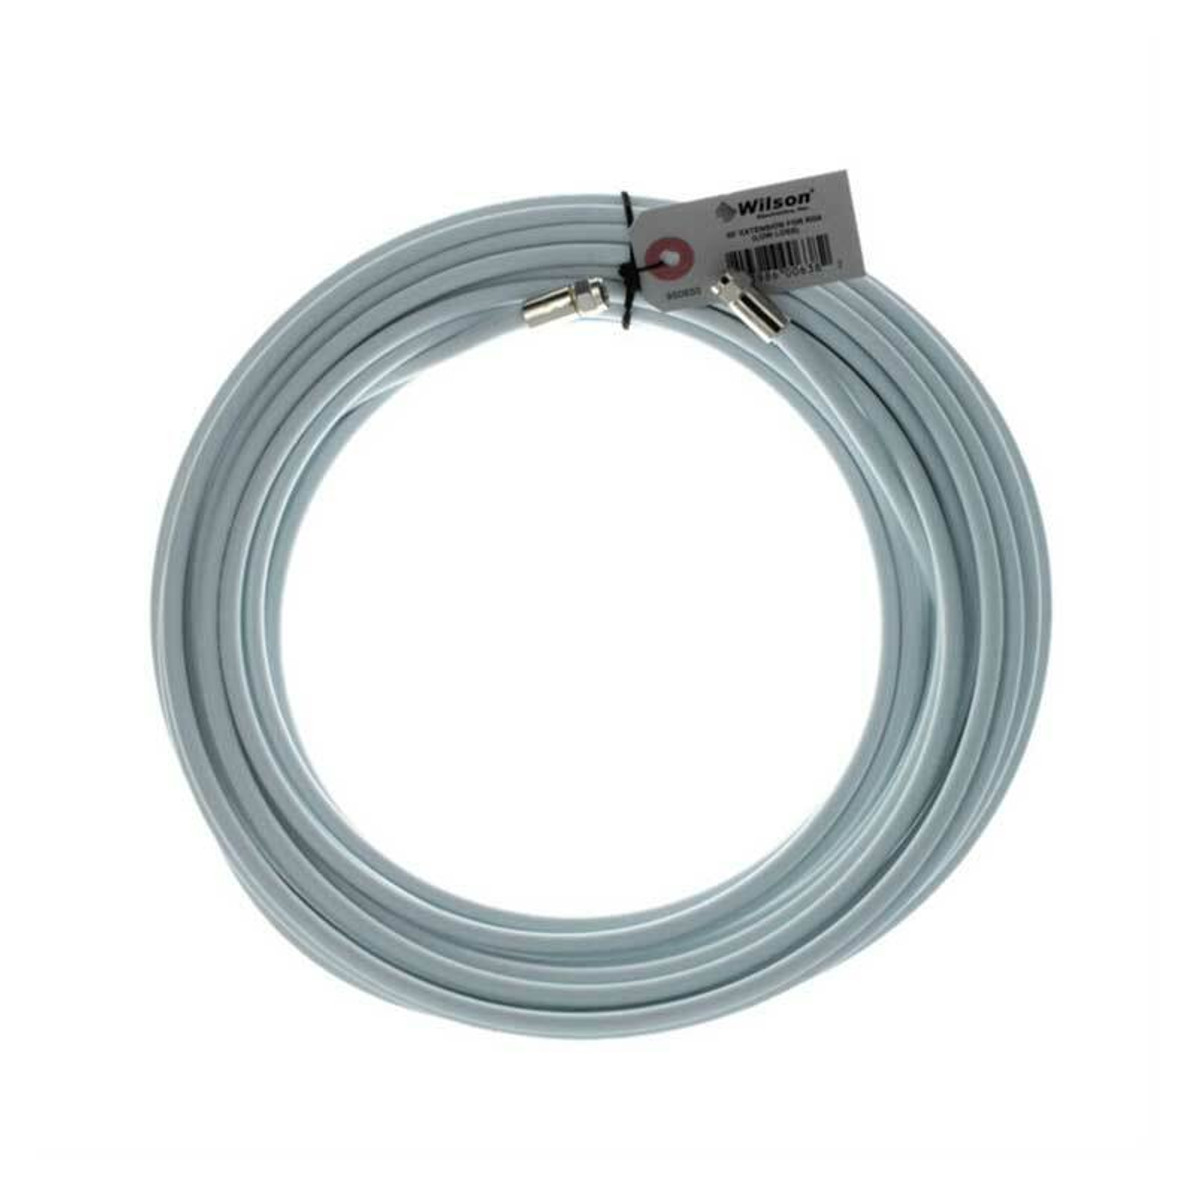 weBoost (Wilson) 950650 RG6 F-Male to F-Male | 50 ft White Cable